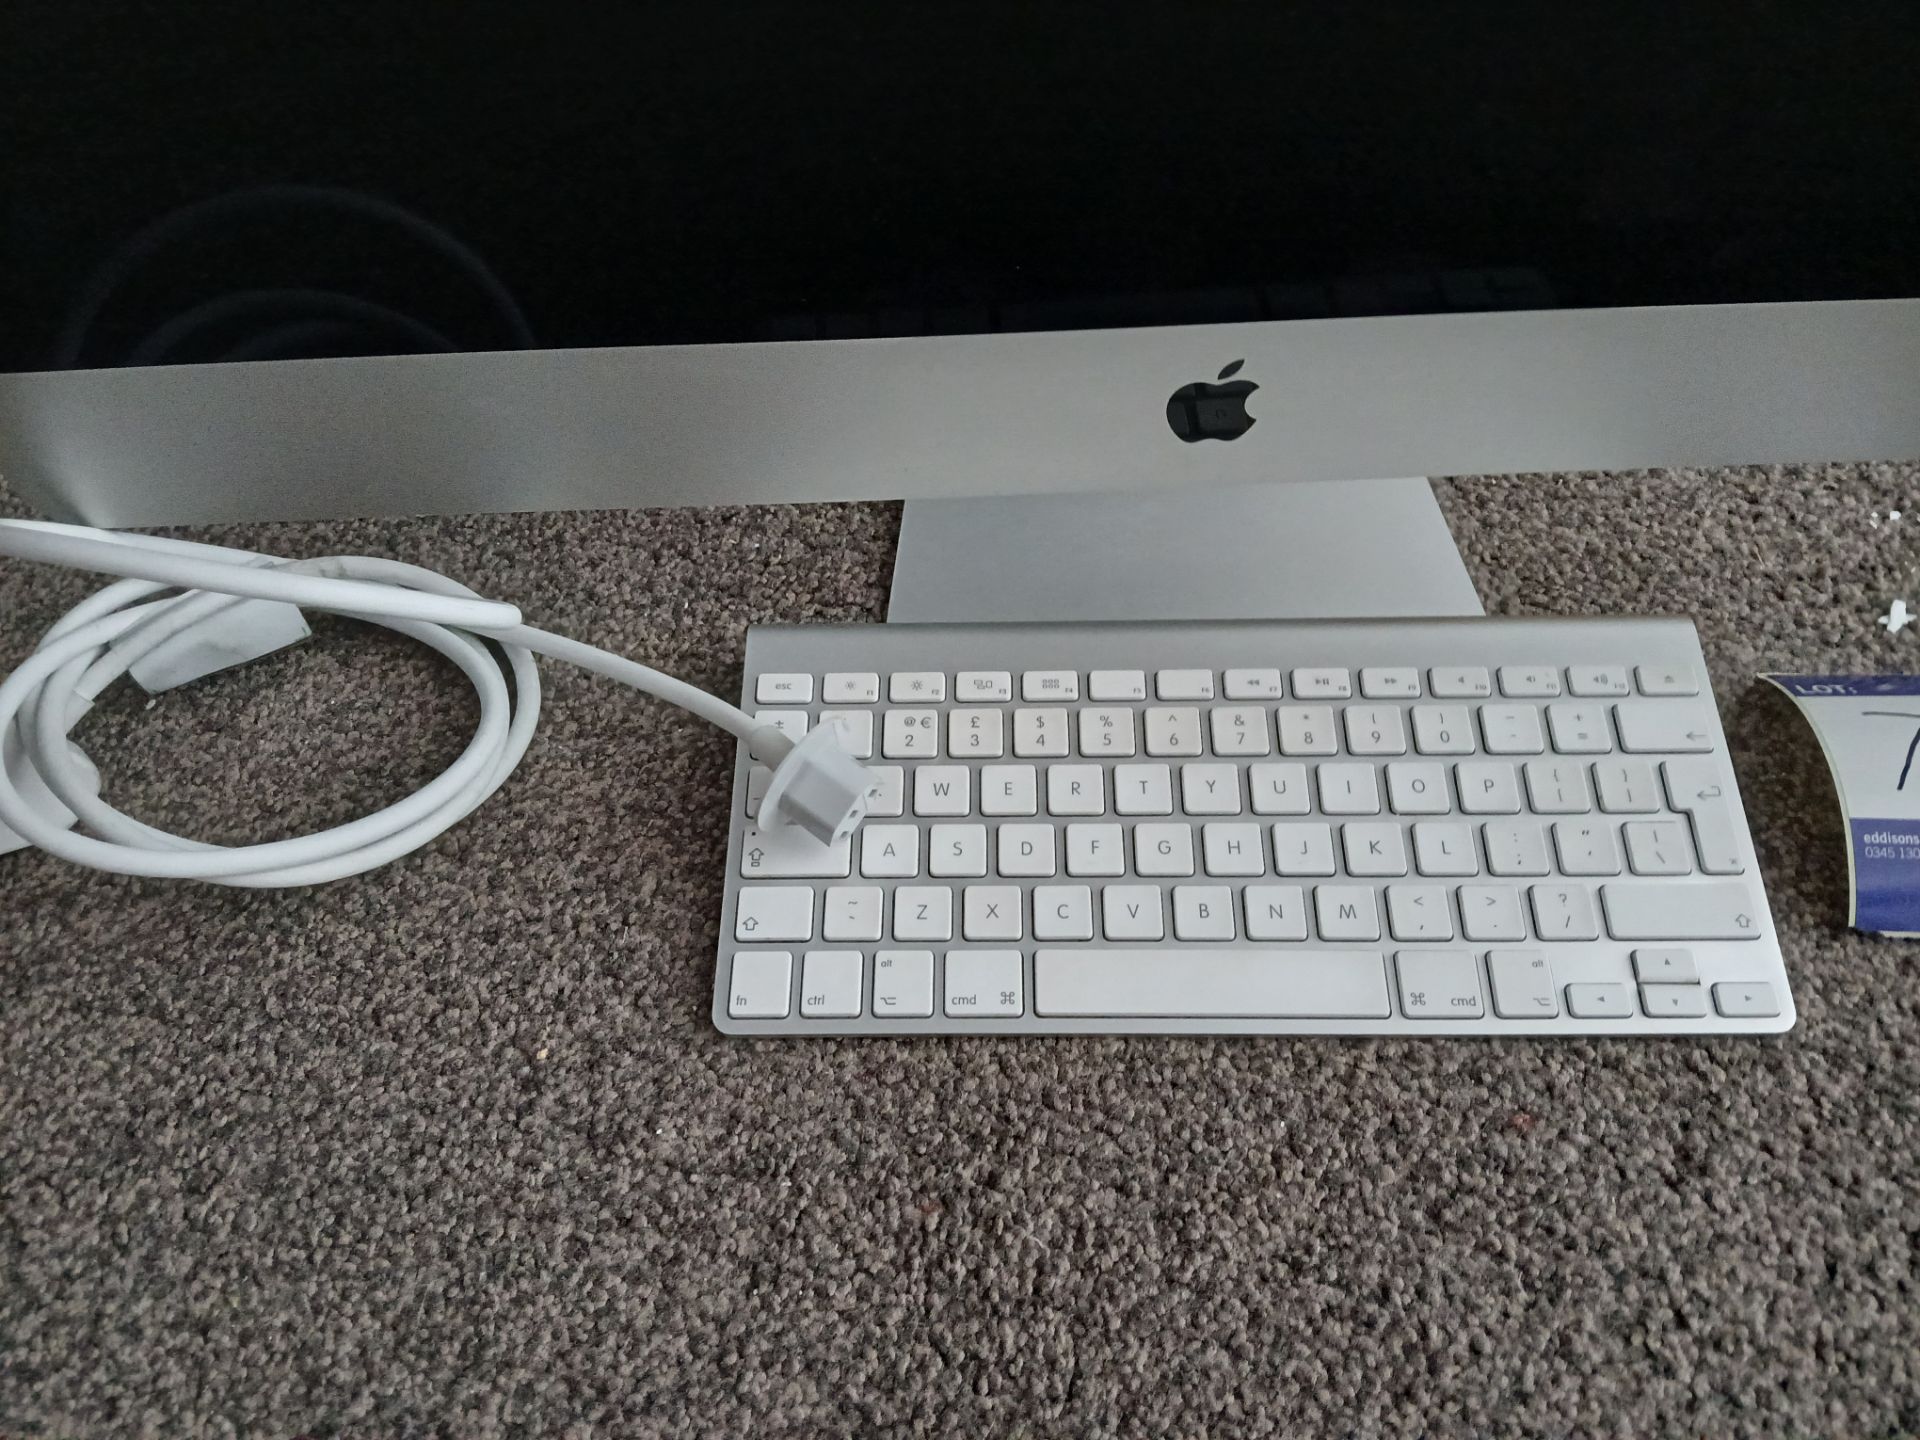 Apple iMac (Retina 5K, 27”, Late 2015) with Power Cable and Keyboard, Serial Number C02QX6HXGG7J ( - Image 2 of 3